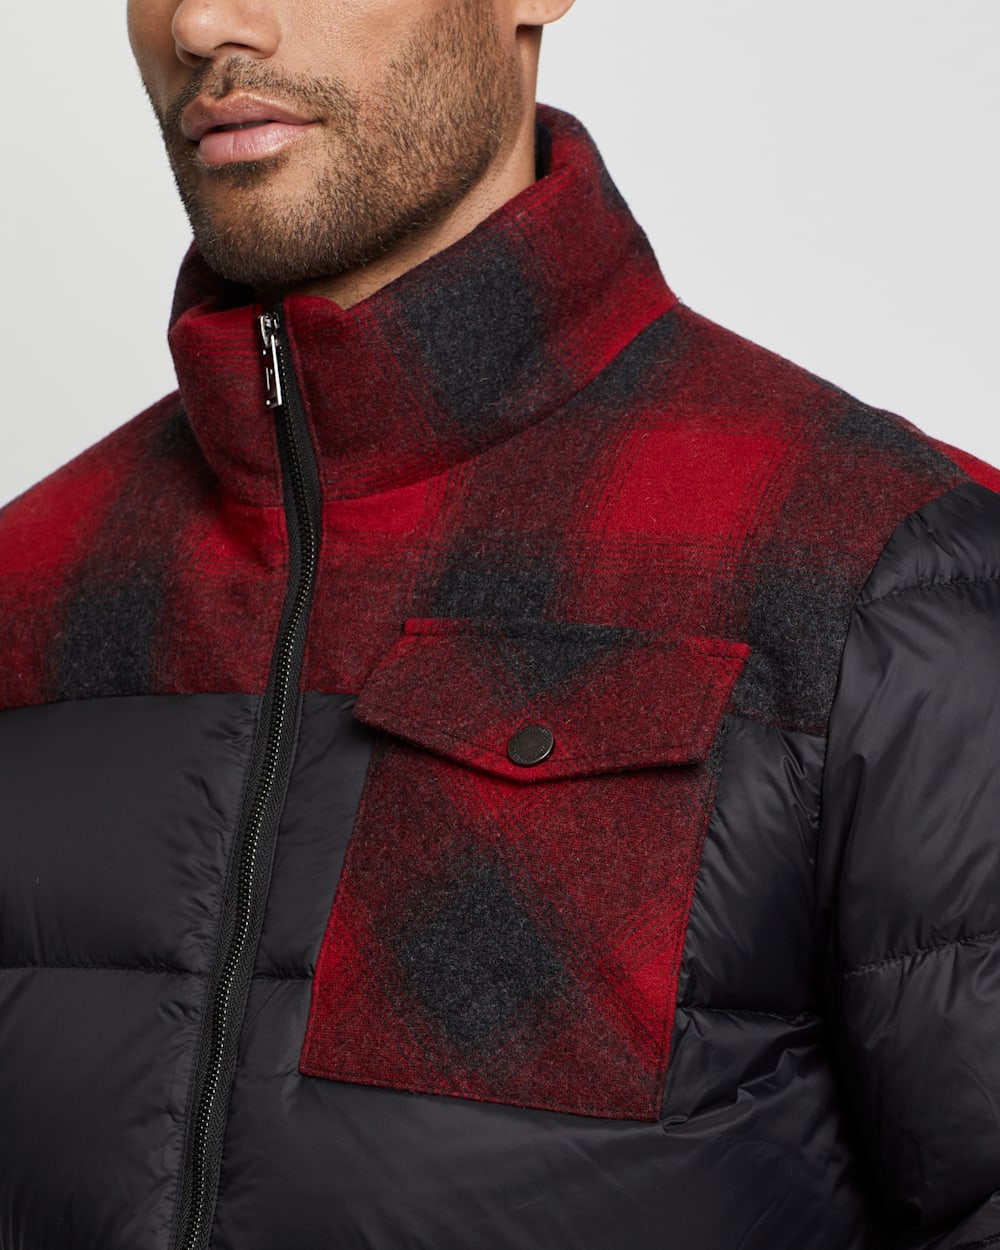 ALTERNATE VIEW OF MEN'S GRIZZLY PEAK PUFFER IN BLACK/RED OMBRE image number 4